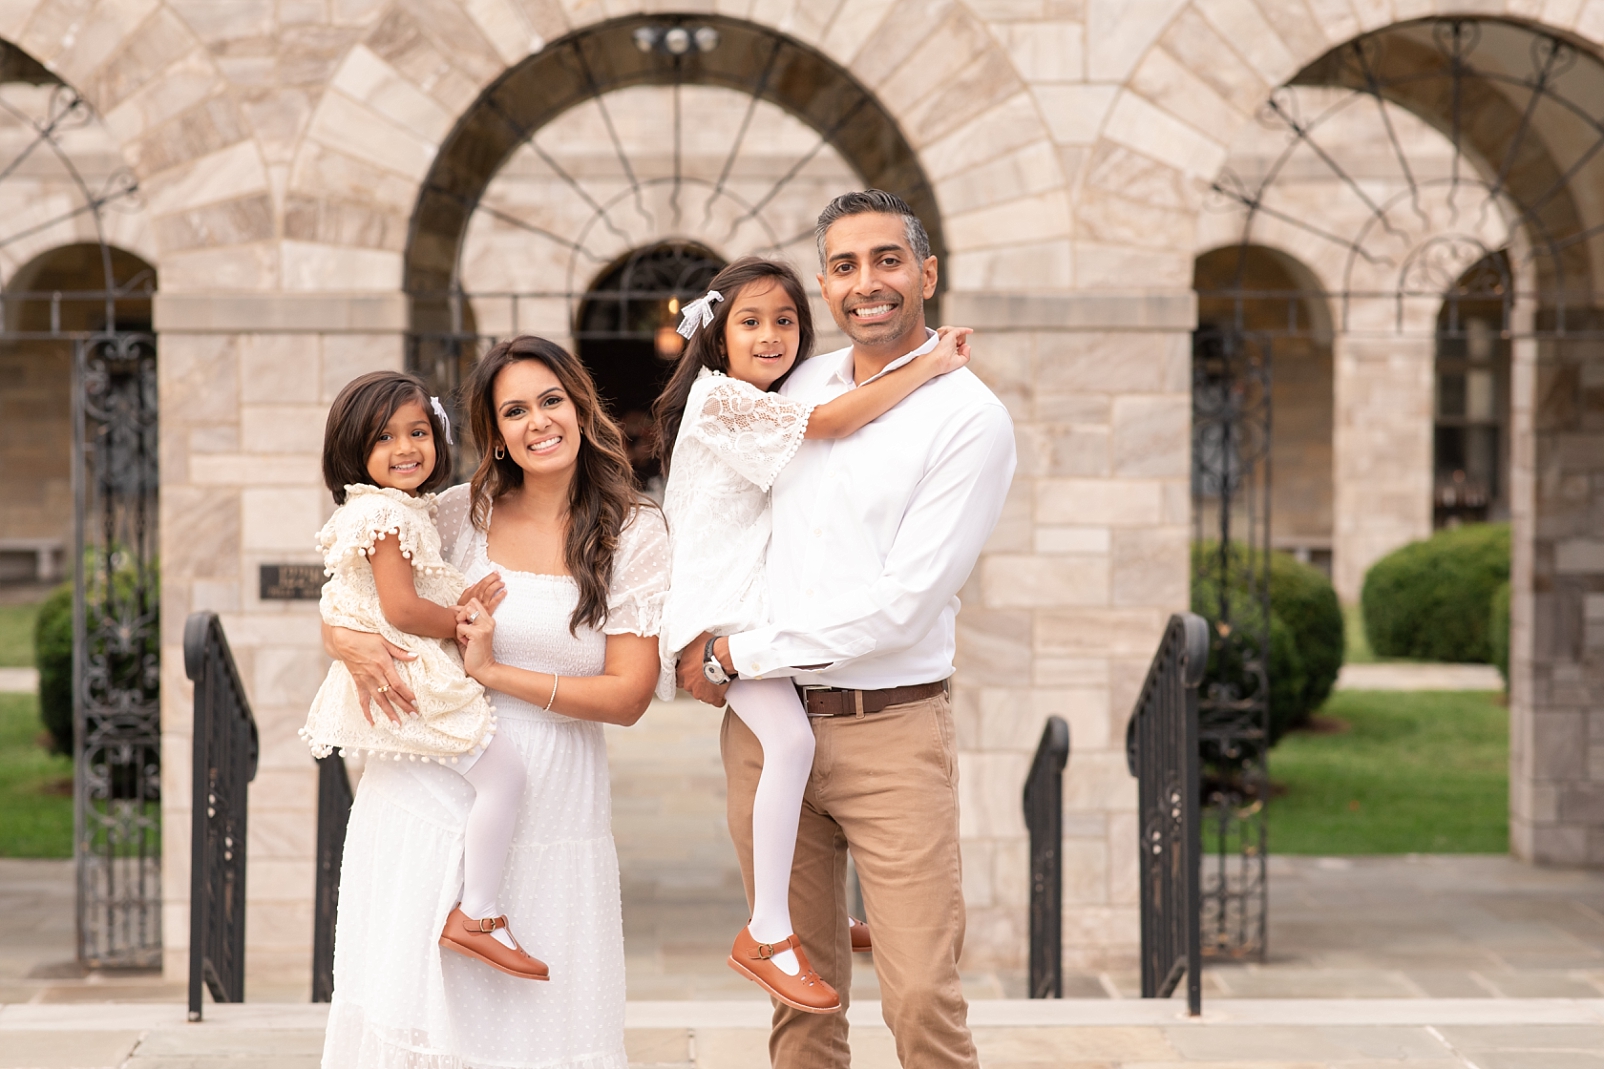 family of 4 wearing white dresses and standing in a white stone archway | How to achieve the best look for your outdoor portraits